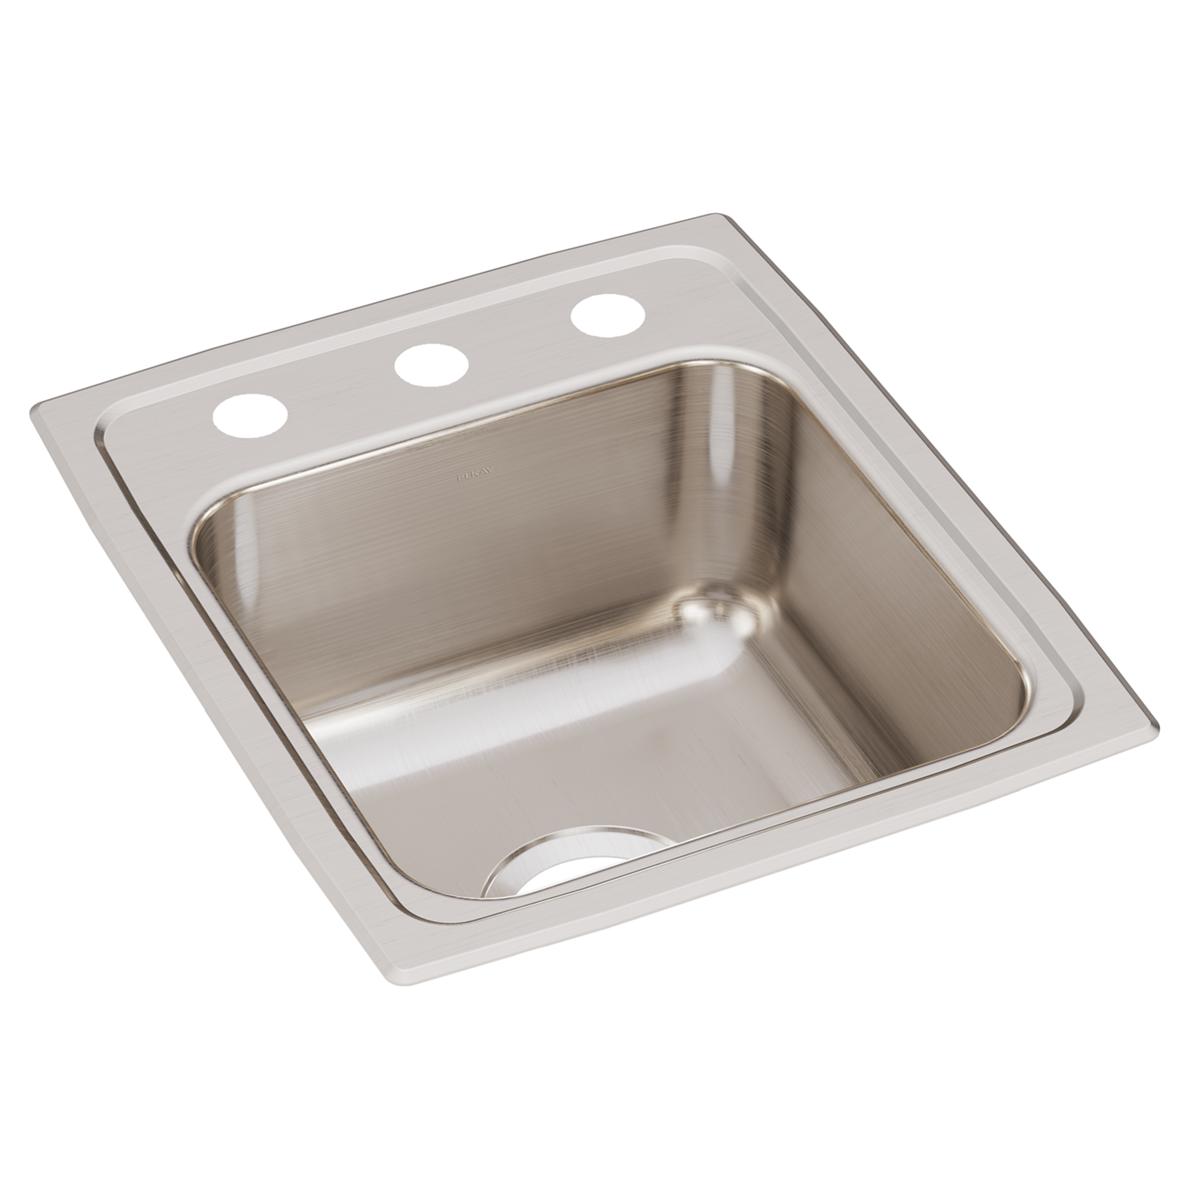 Elkay Lustertone Classic 15" x 17-1/2" x 7-5/8" Single Bowl Drop-in Bar Sink with Quick-clip